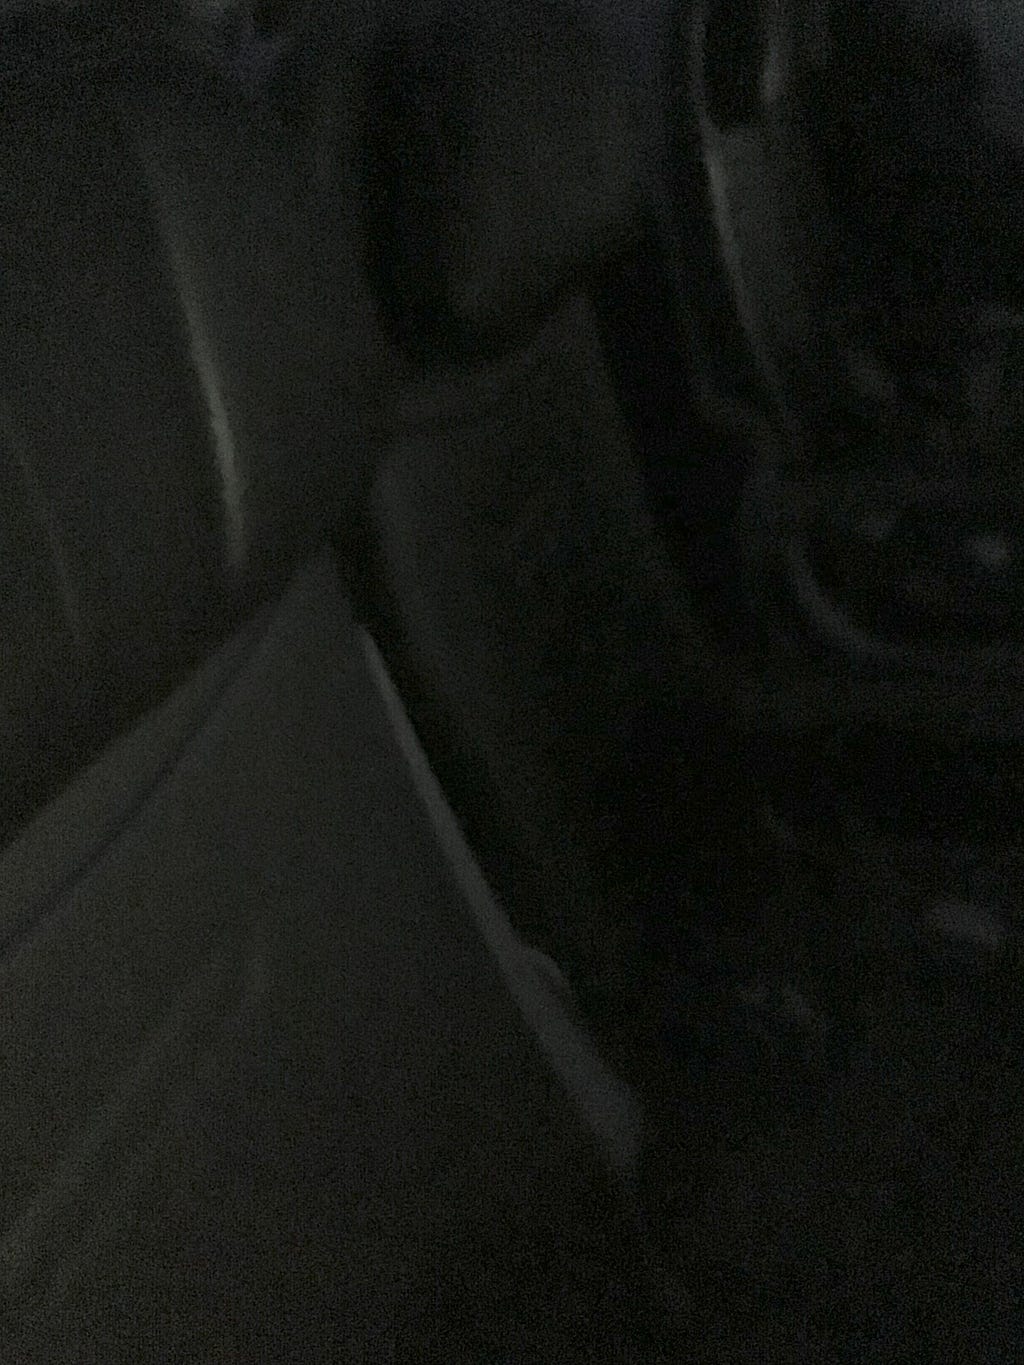 Two empty airplane seats in the dark